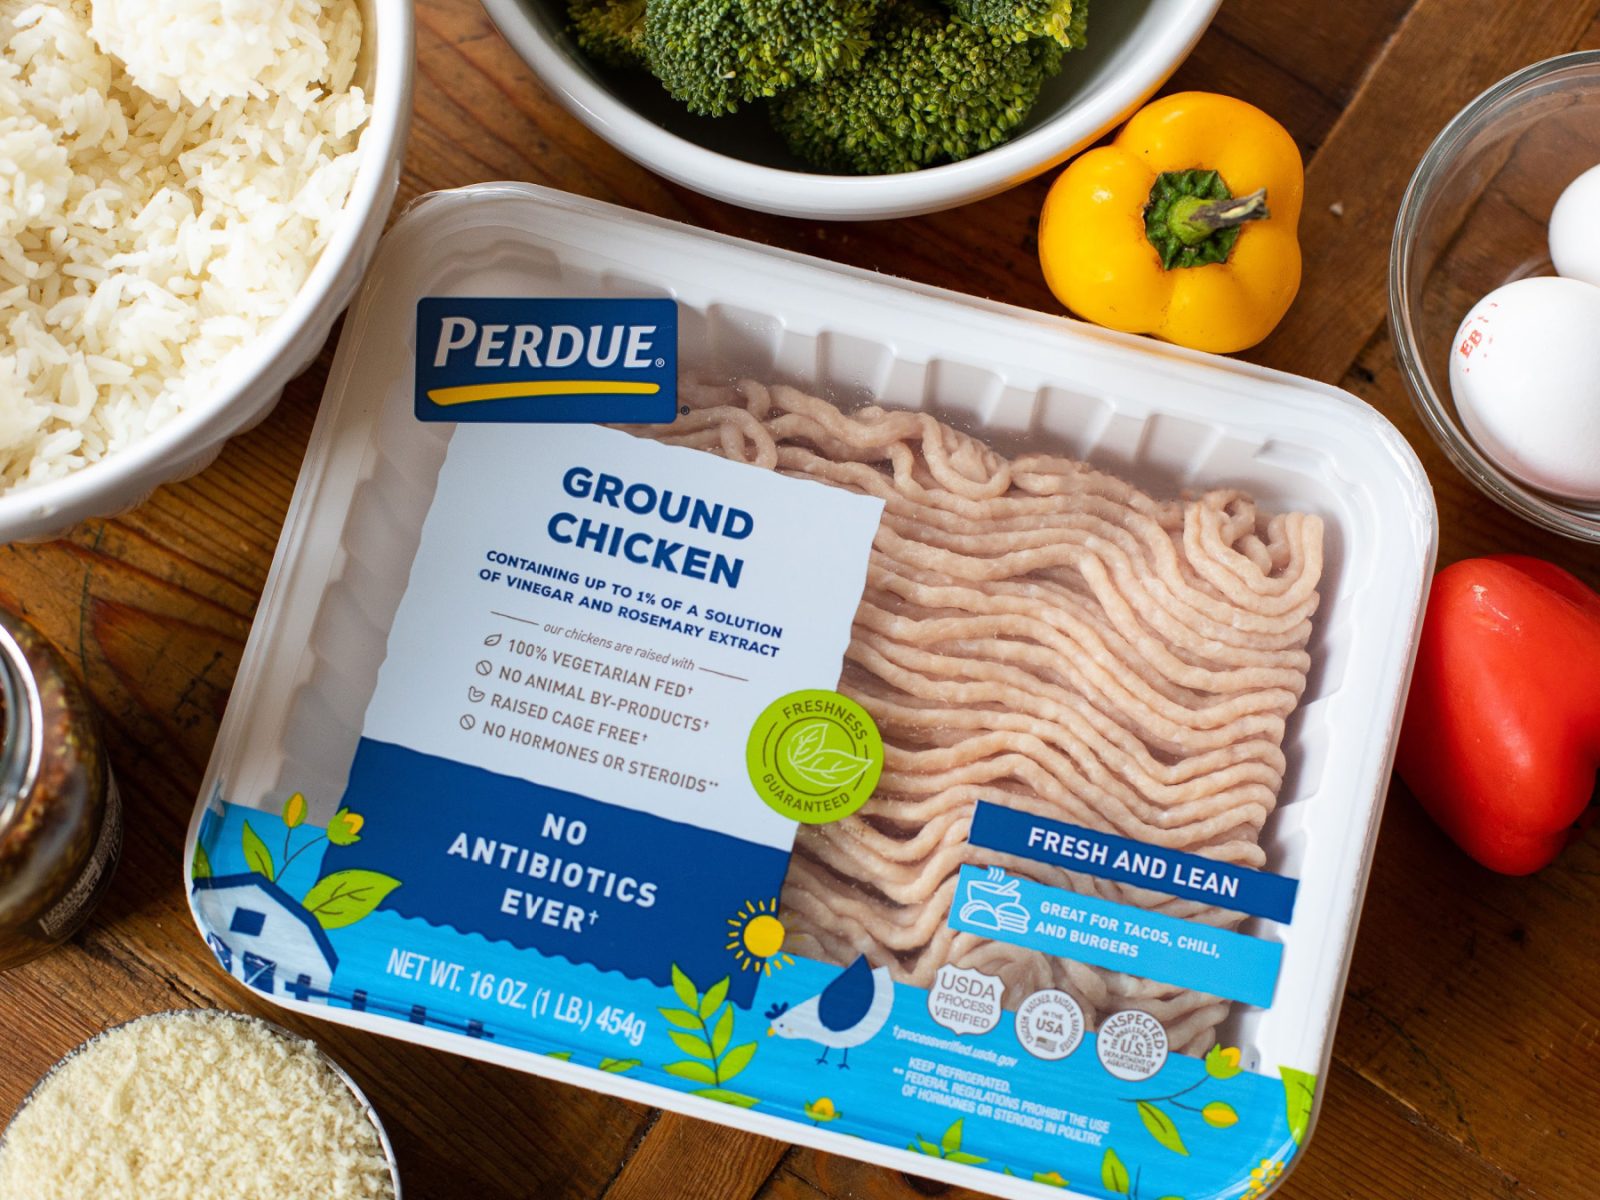 Get Perdue Ground Chicken For Just $4.25 Per Package At Publix